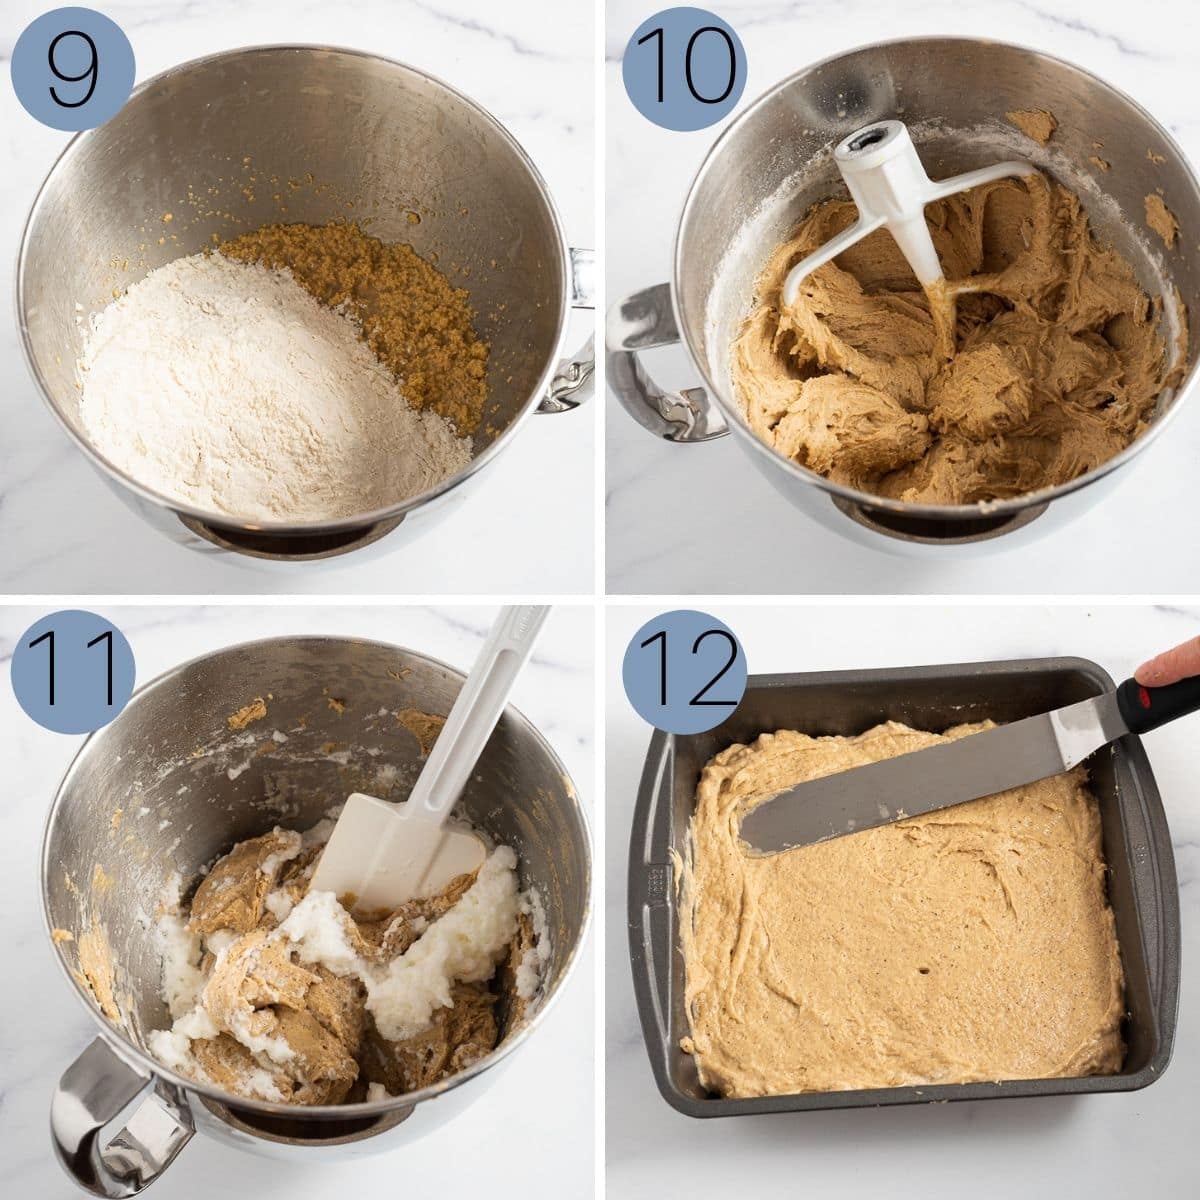 steps 9 to 12 of making the spice cake recipe